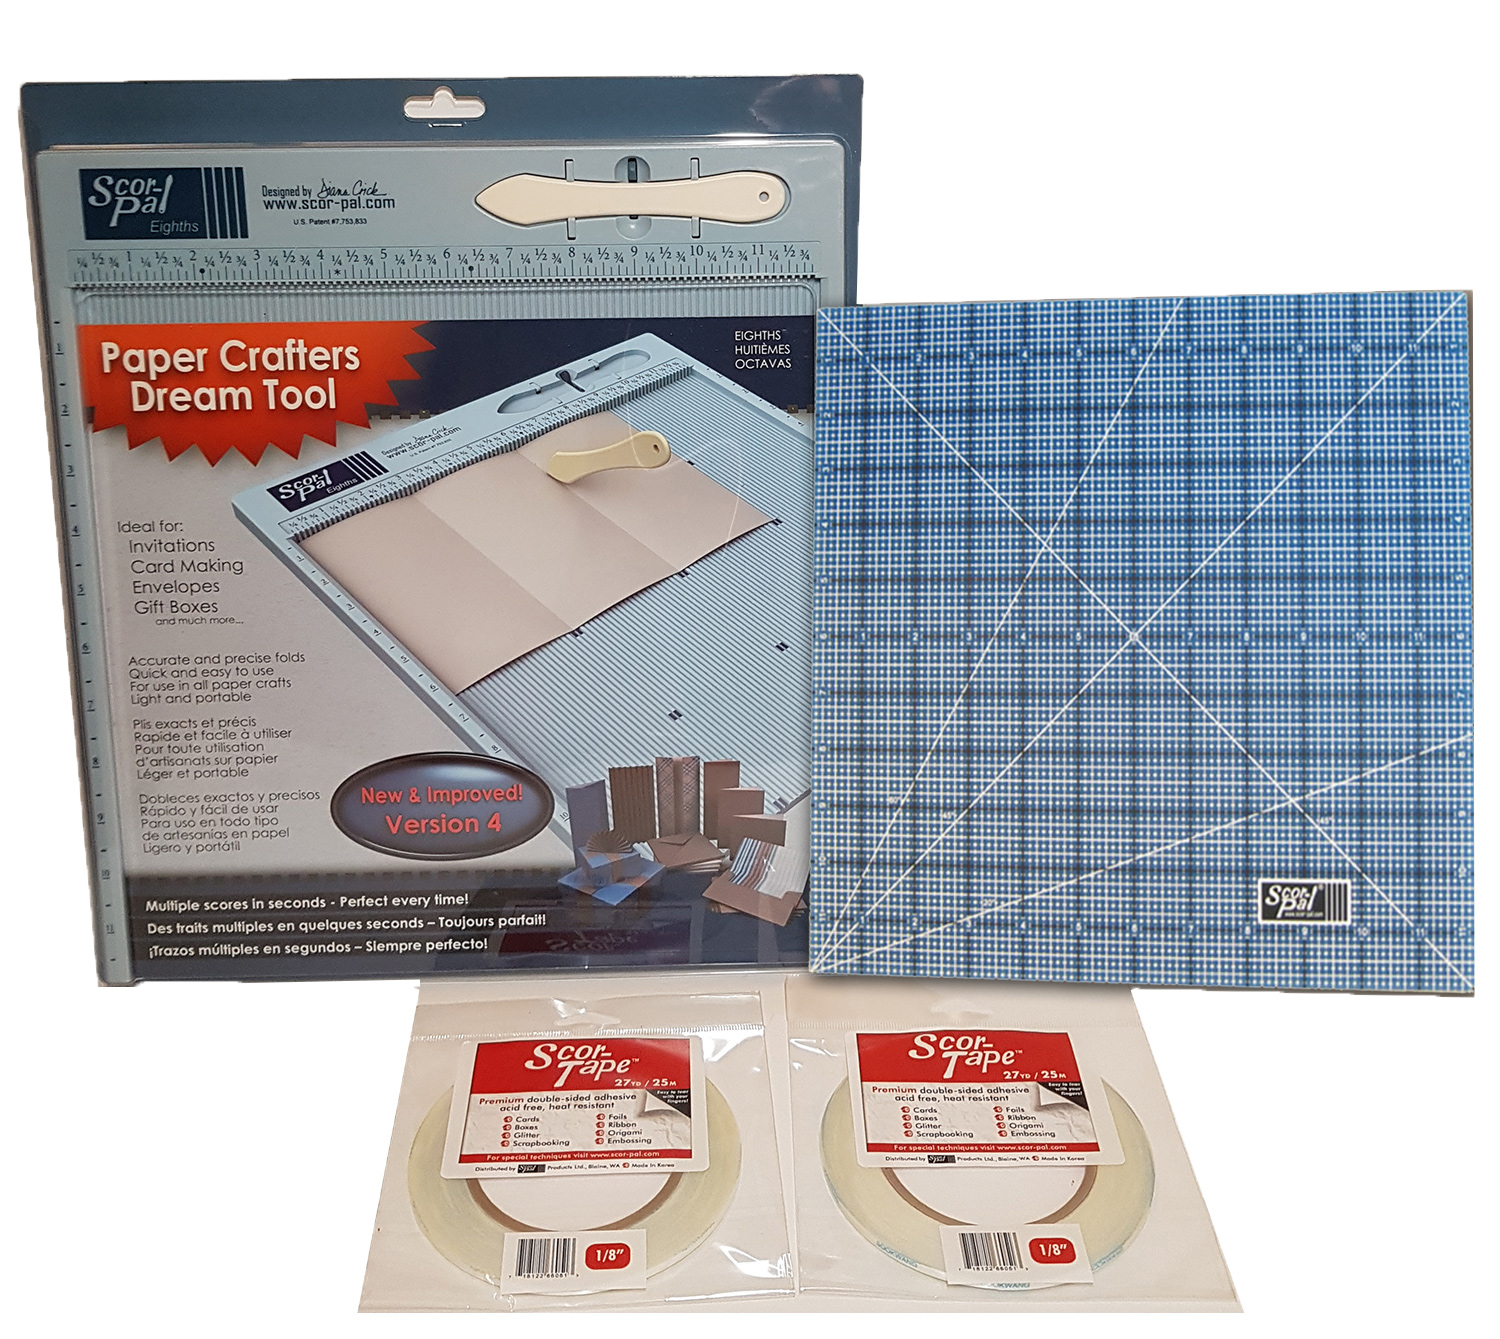 Scor-Pal 3D Papercraft Bundle : SCOR-PAL, Maker of Scor-Tape and Scor-Pal scoring  board for making cards, envelopes and over 150 free craft projects